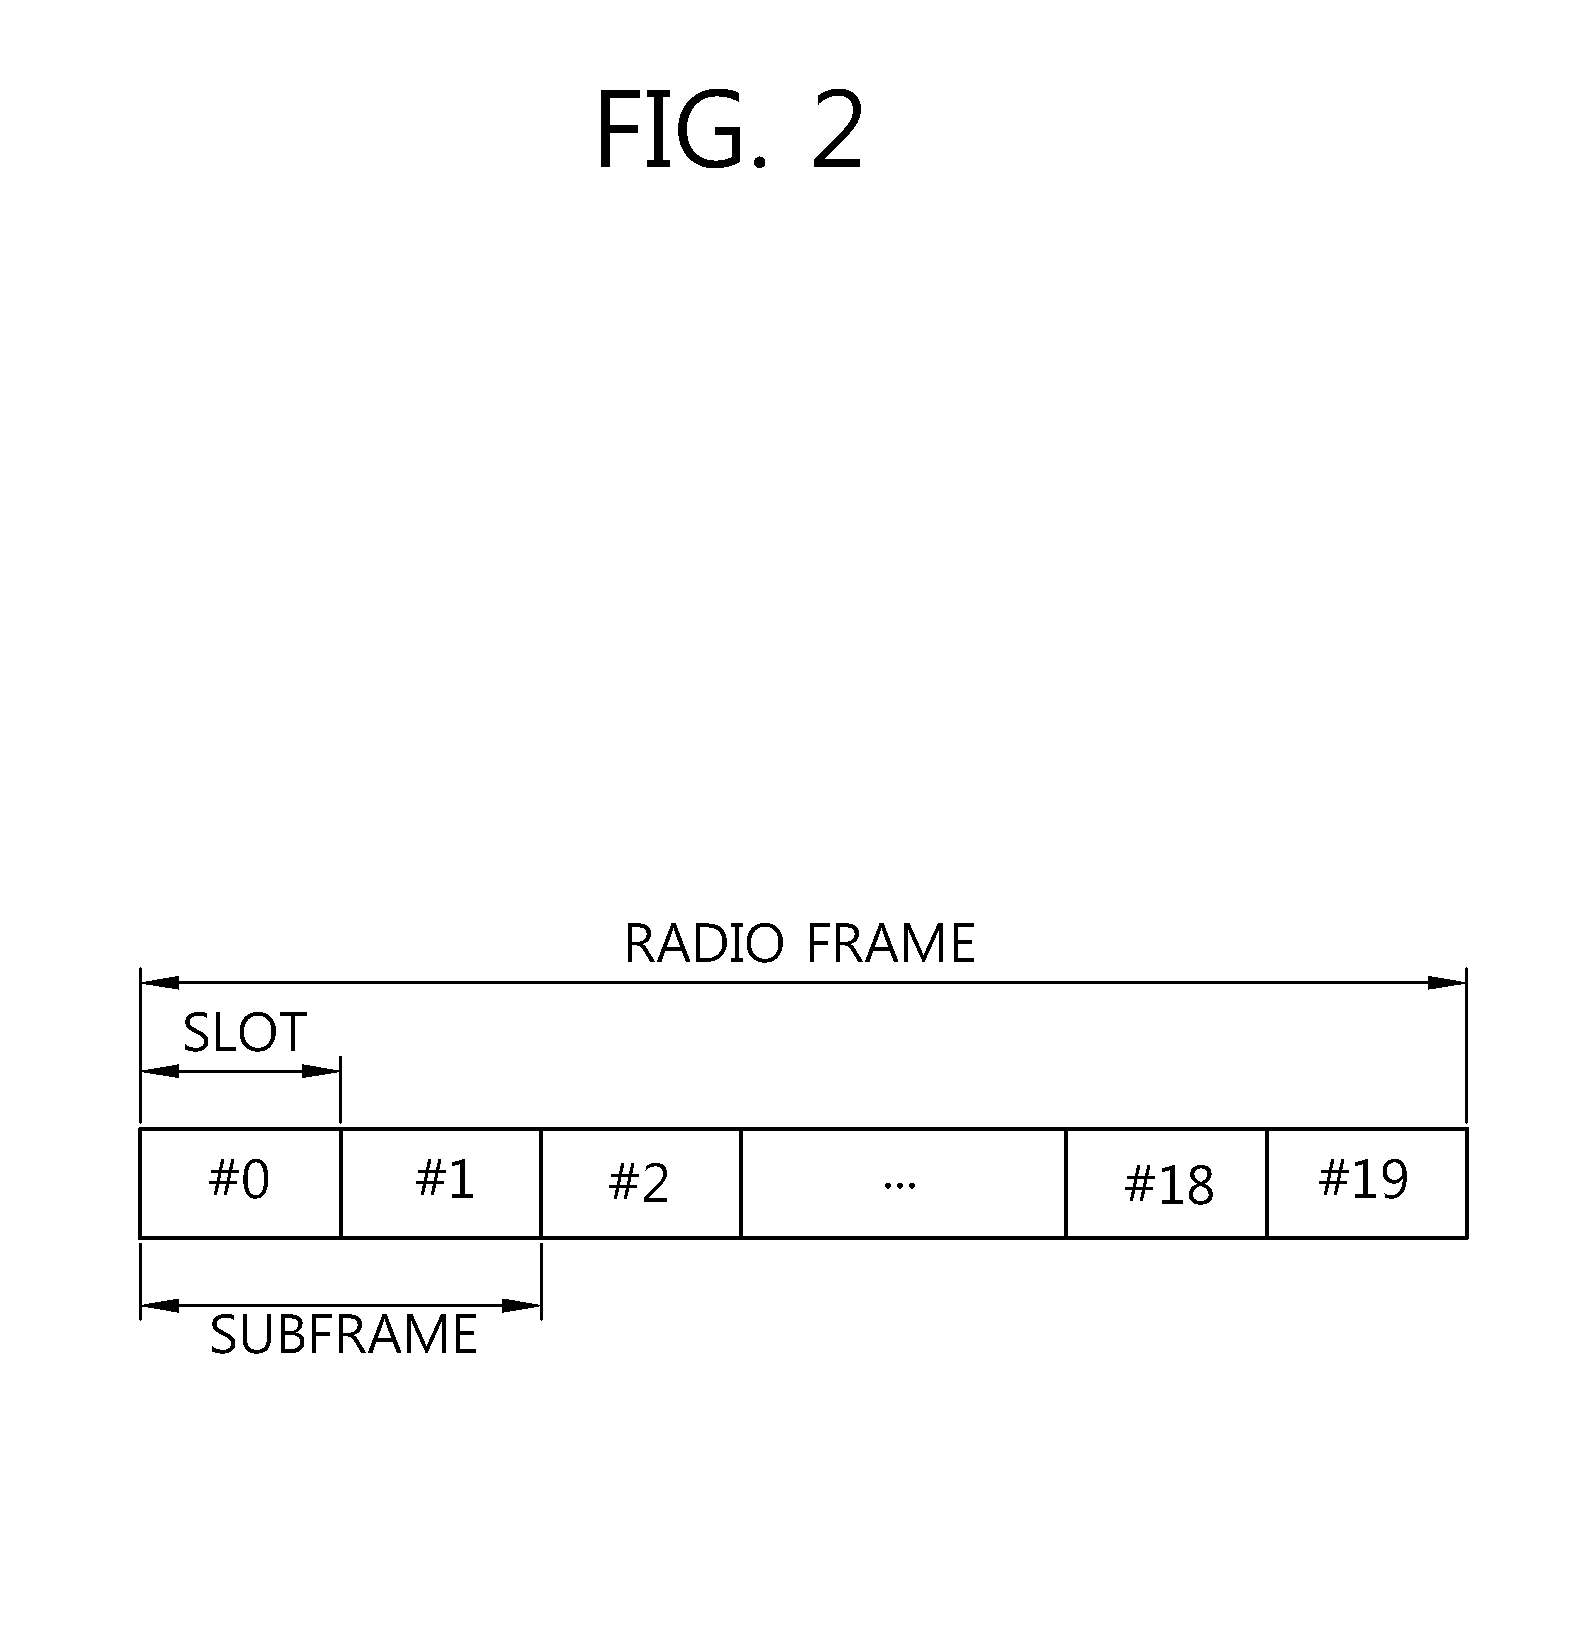 Method and apparatus for measuring interference in wireless communication system